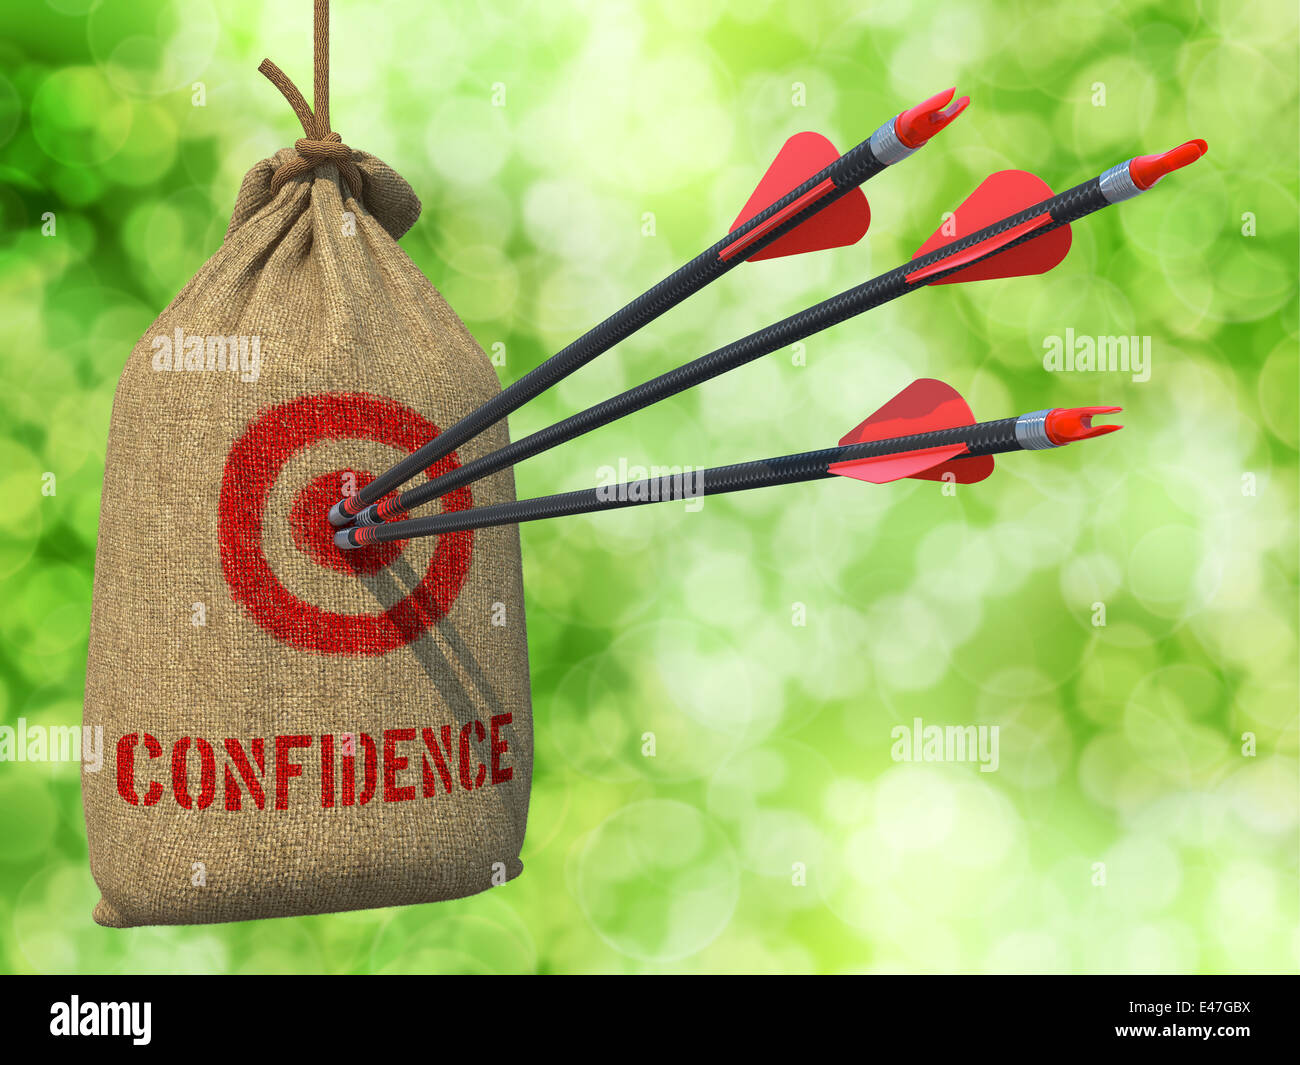 Confidence - Arrows Hit in Red Mark Target. Stock Photo